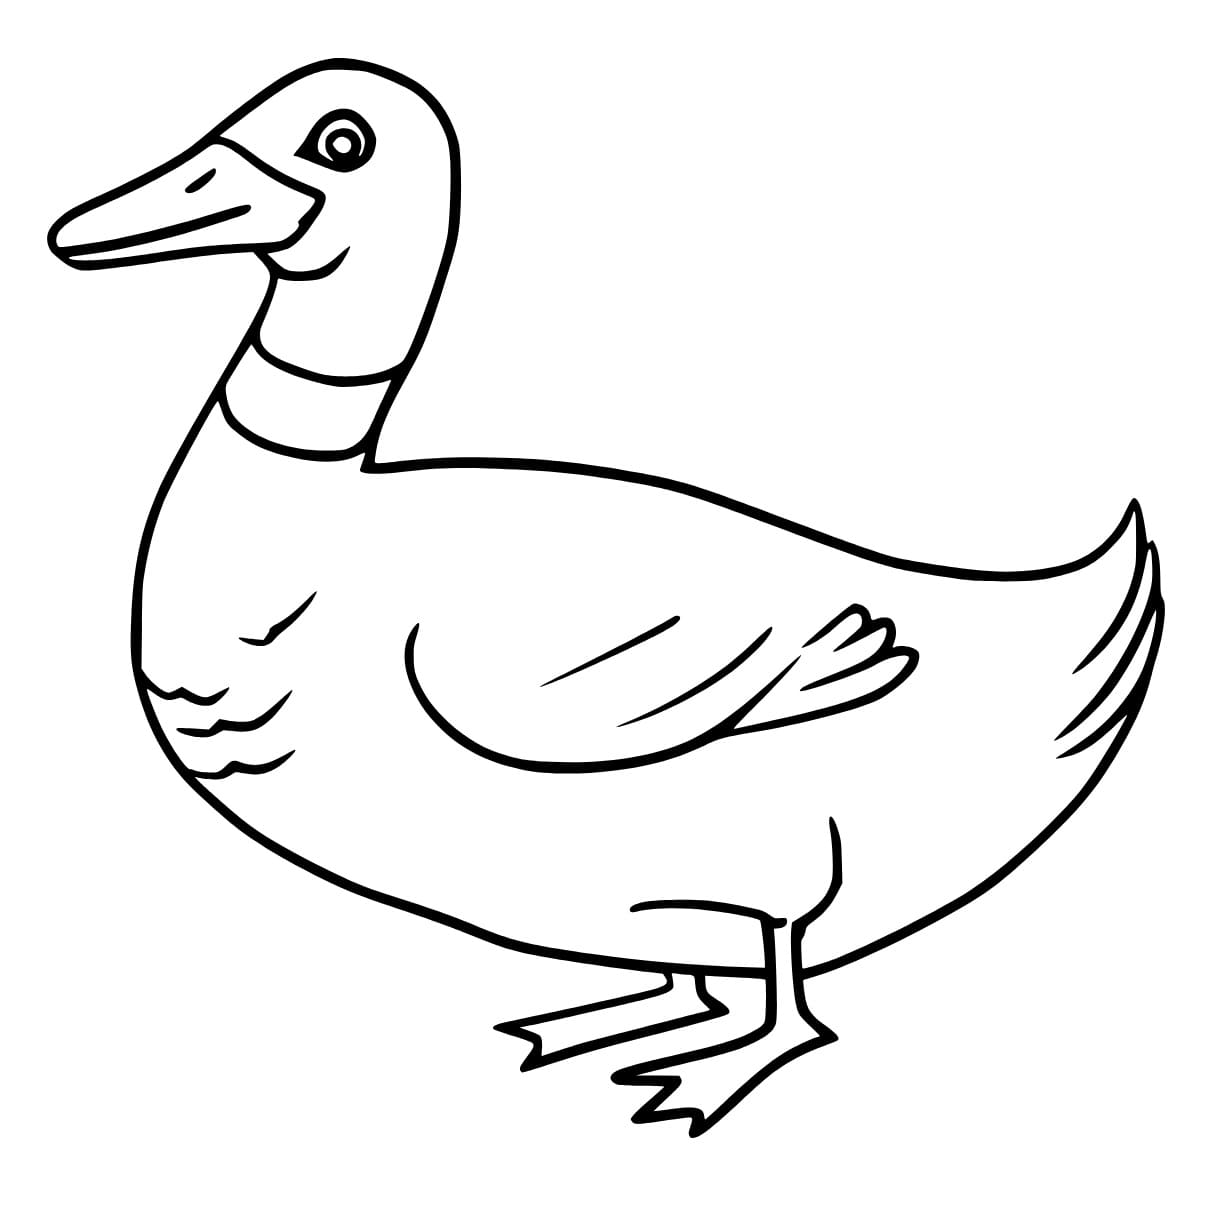 Normal Mallard Duck coloring page - Download, Print or Color Online for ...